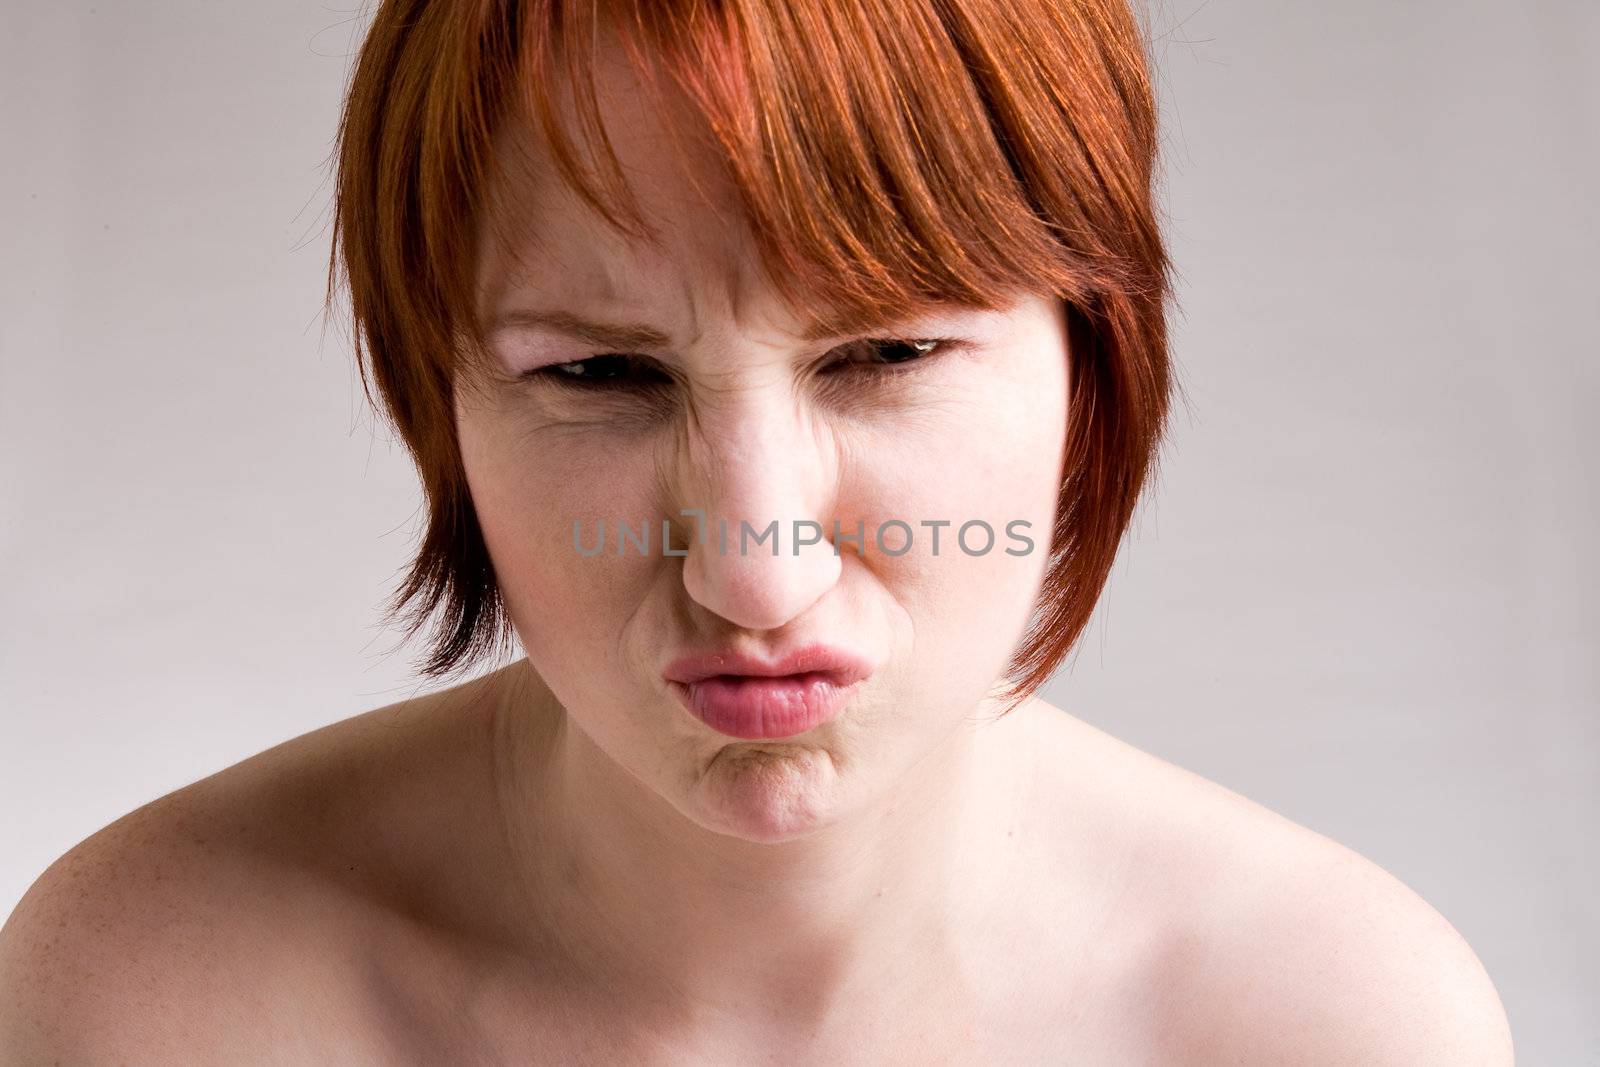 Red haired girl with emotive faces and expressions